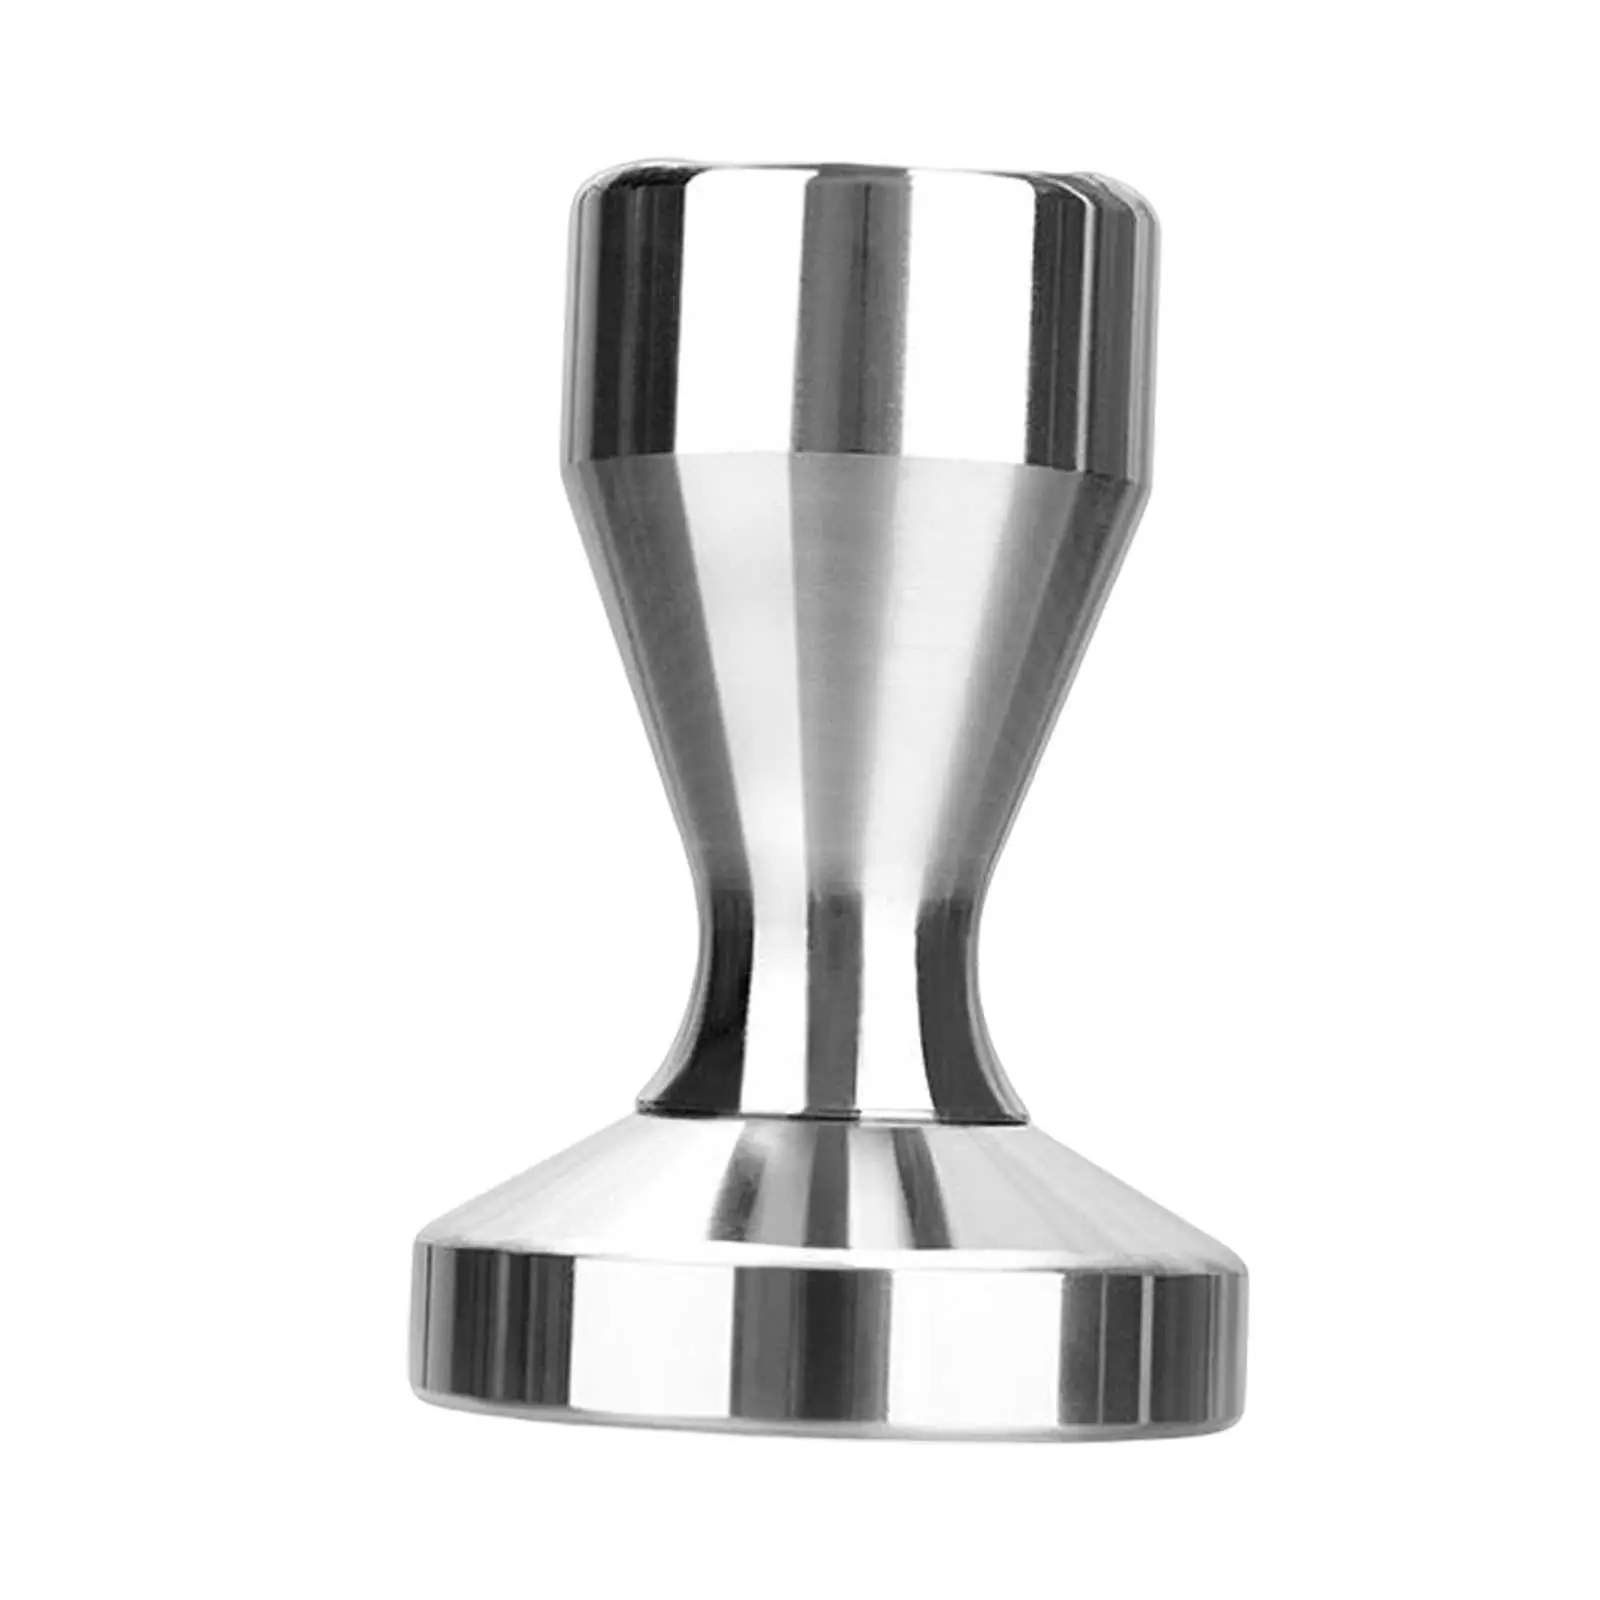 Stainless Steel coffee Tamper Kitchen Utensils Polished Espresso Pressing Tool Distributor for Cafe office Home